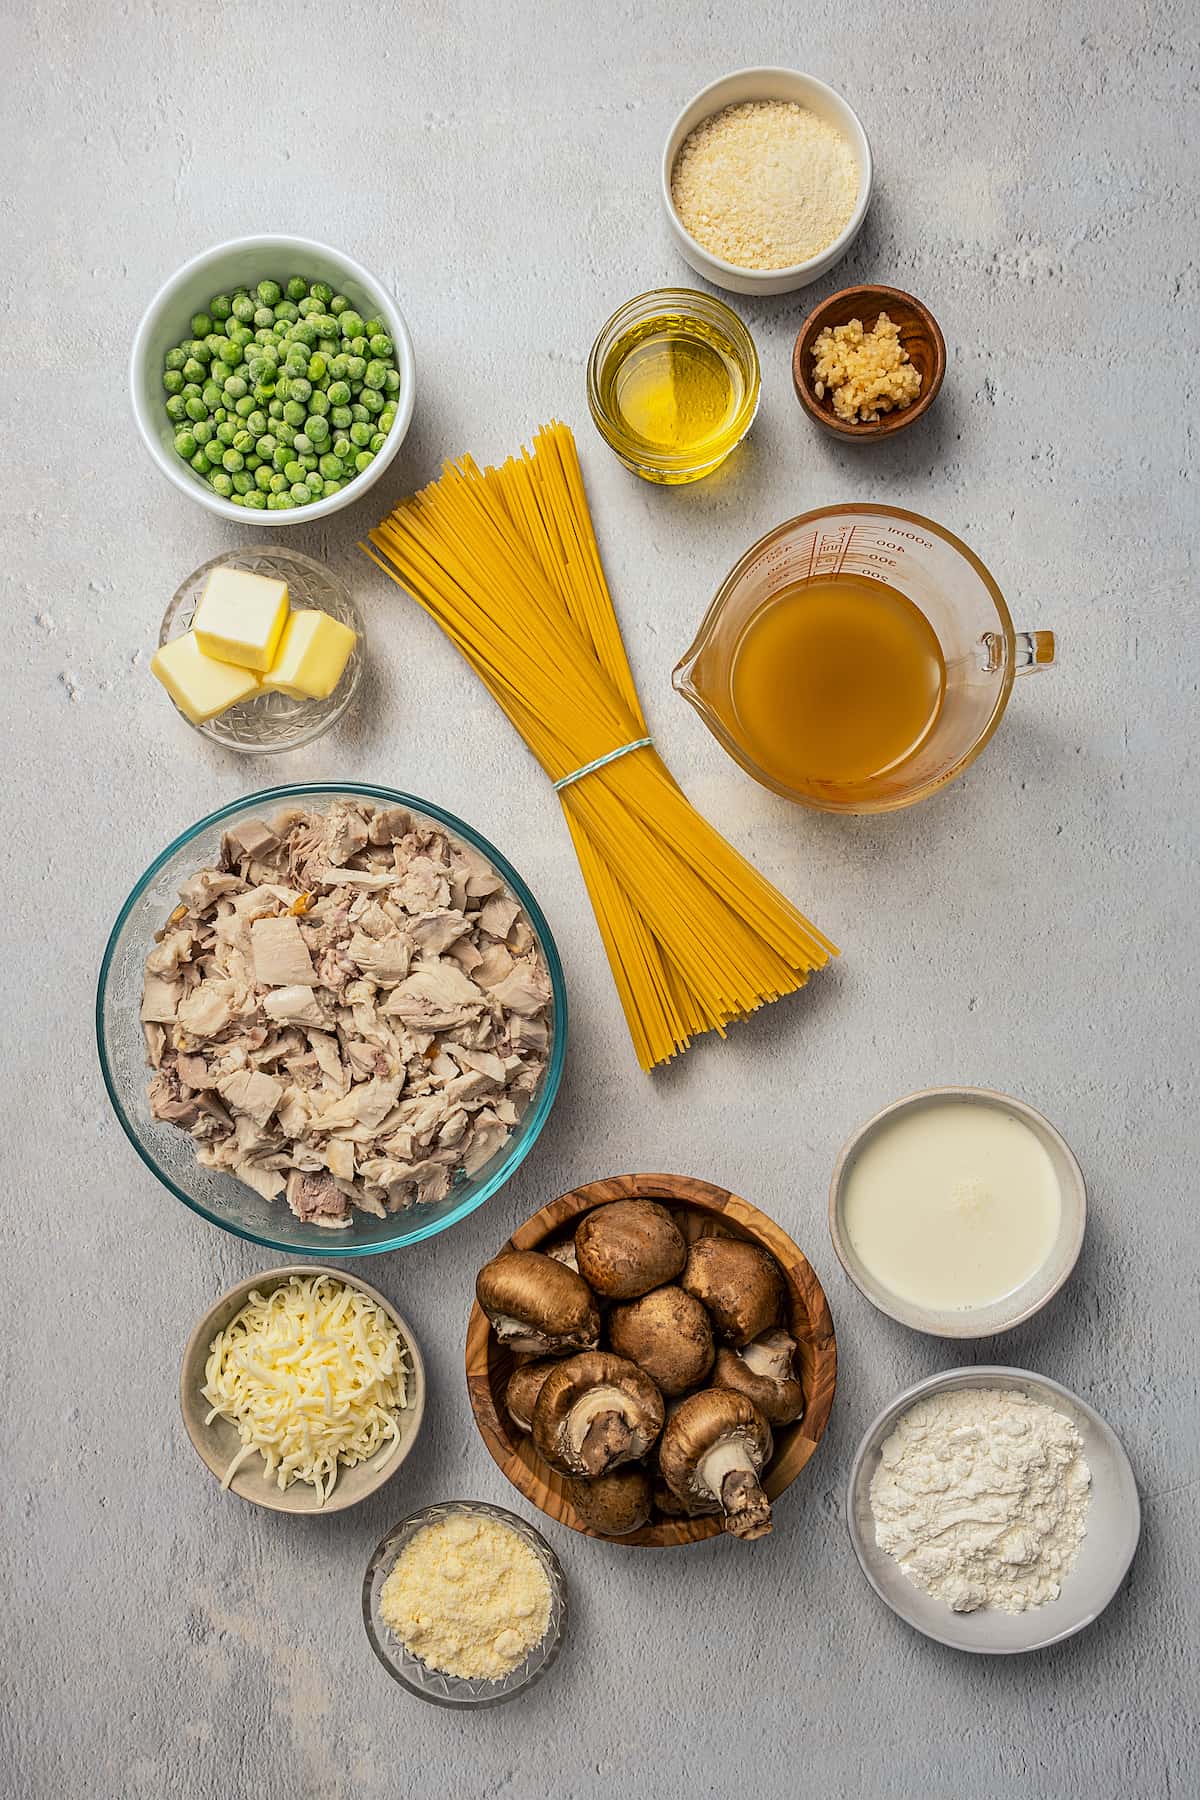 Turkey tetrazzini ingredients measured and ready to cook.